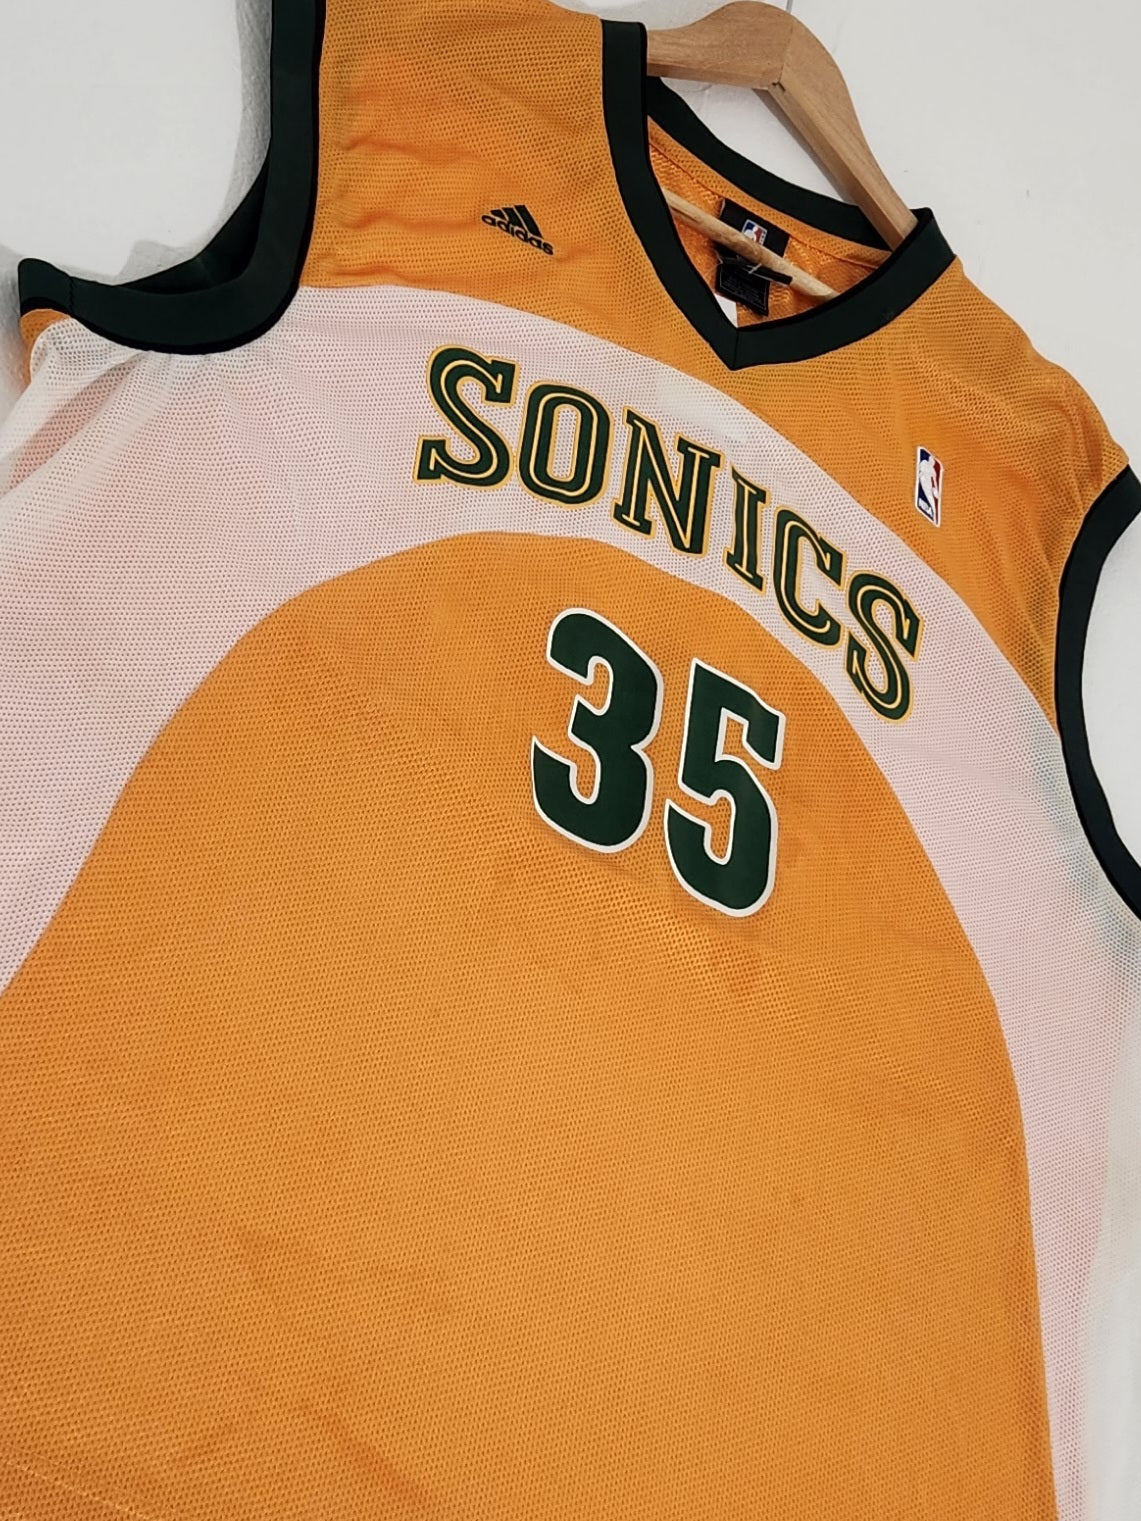 Seattle Supersonics #35 Kevin Durant White Throwback Retro Vintage  Basketball Jersey,Embroidered Logos,Size:S-XXL,Free Shipping